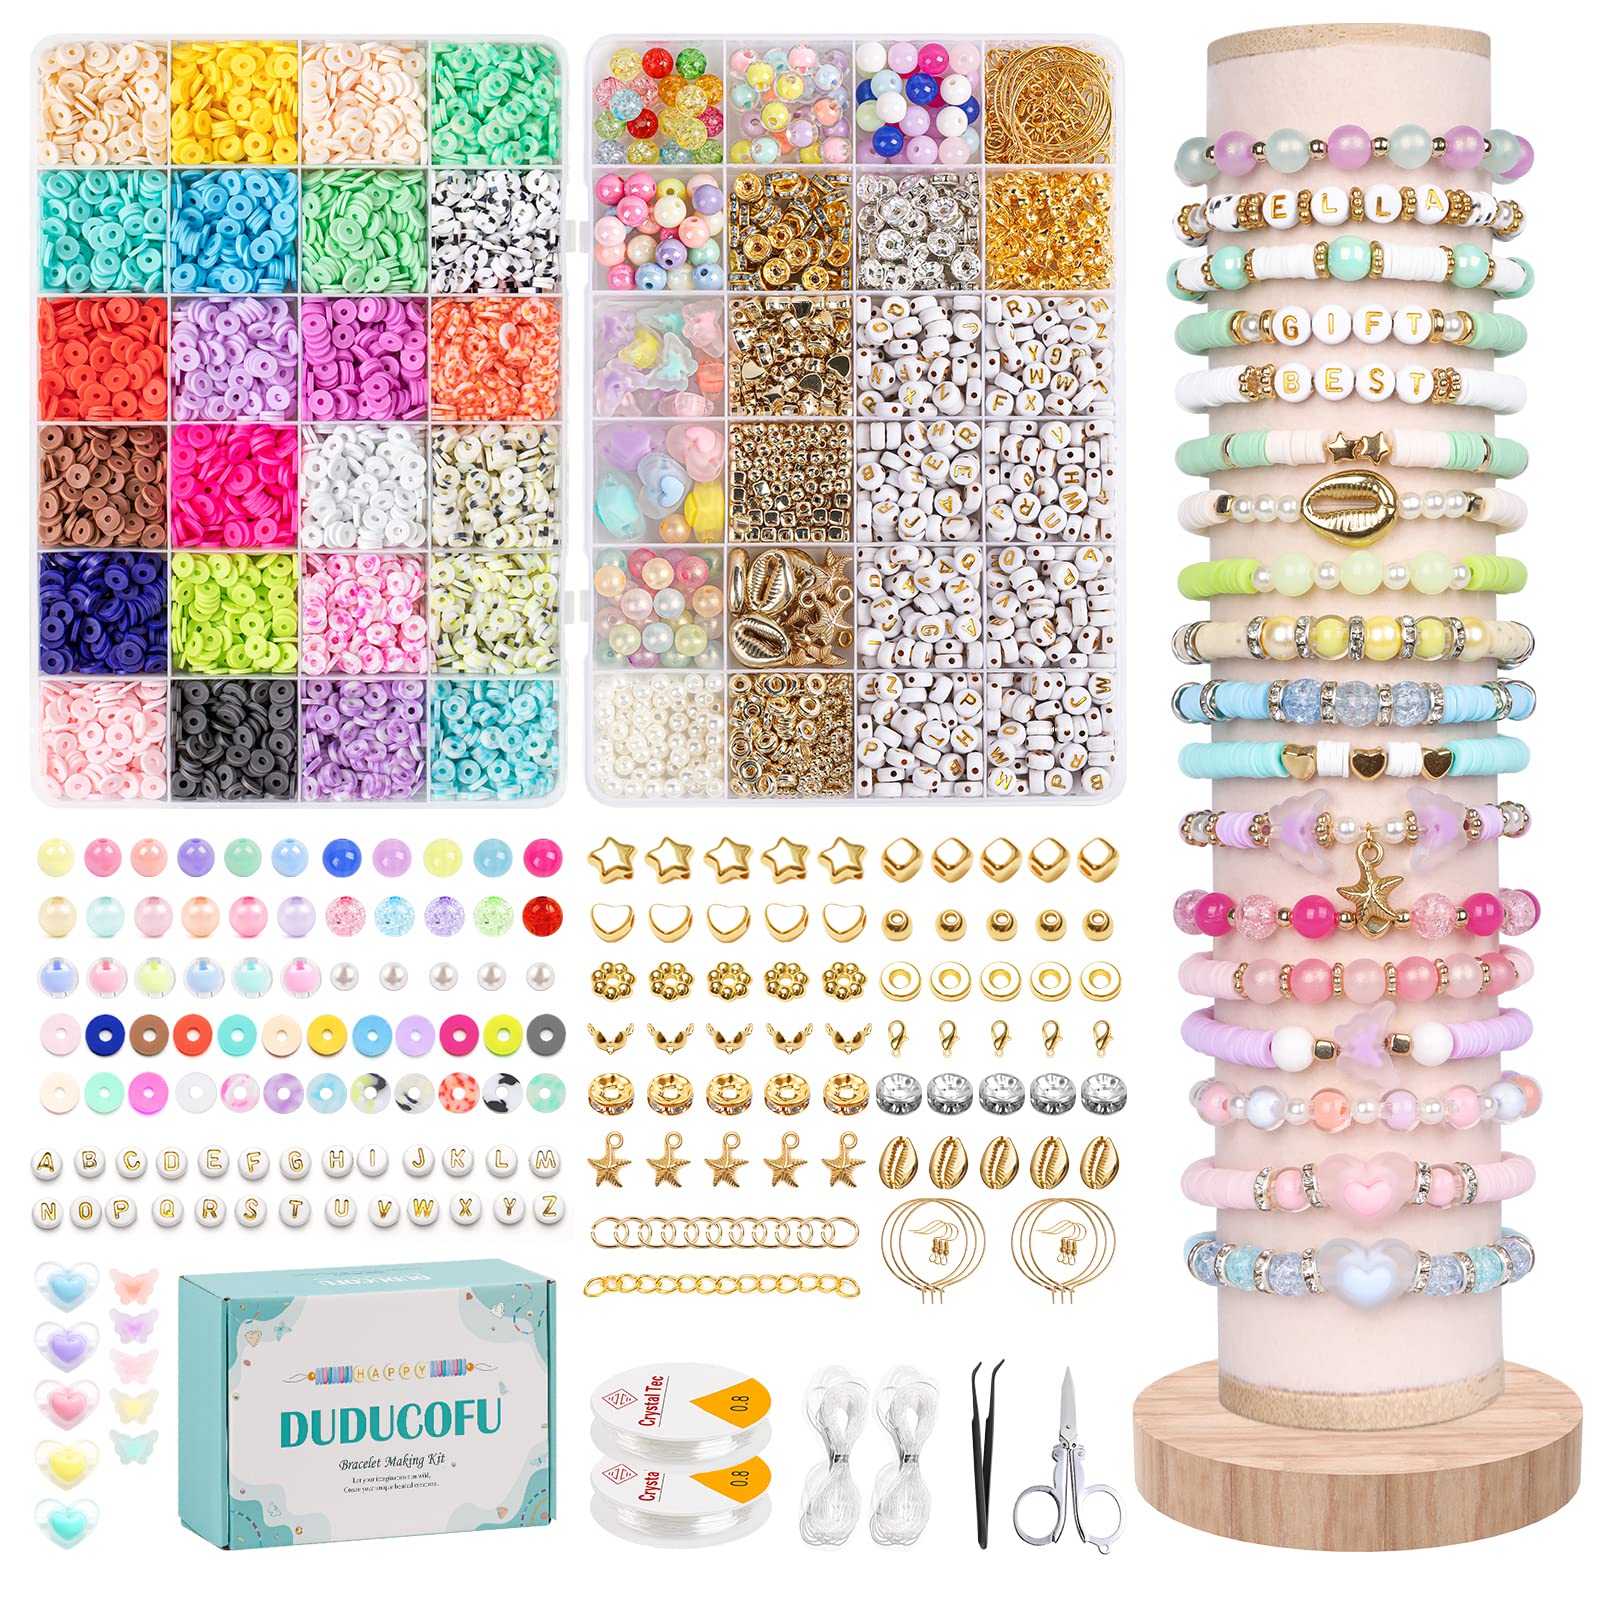 150 Pieces Charm Bracelet Making Kit Ranekie Charm Bracelets Jewelry Making  Kit With Beads Bracelets Charms Necklace DIY Crafts Gifts Set for Teen  Girls Kids Age 5-12 : Amazon.in: Home & Kitchen